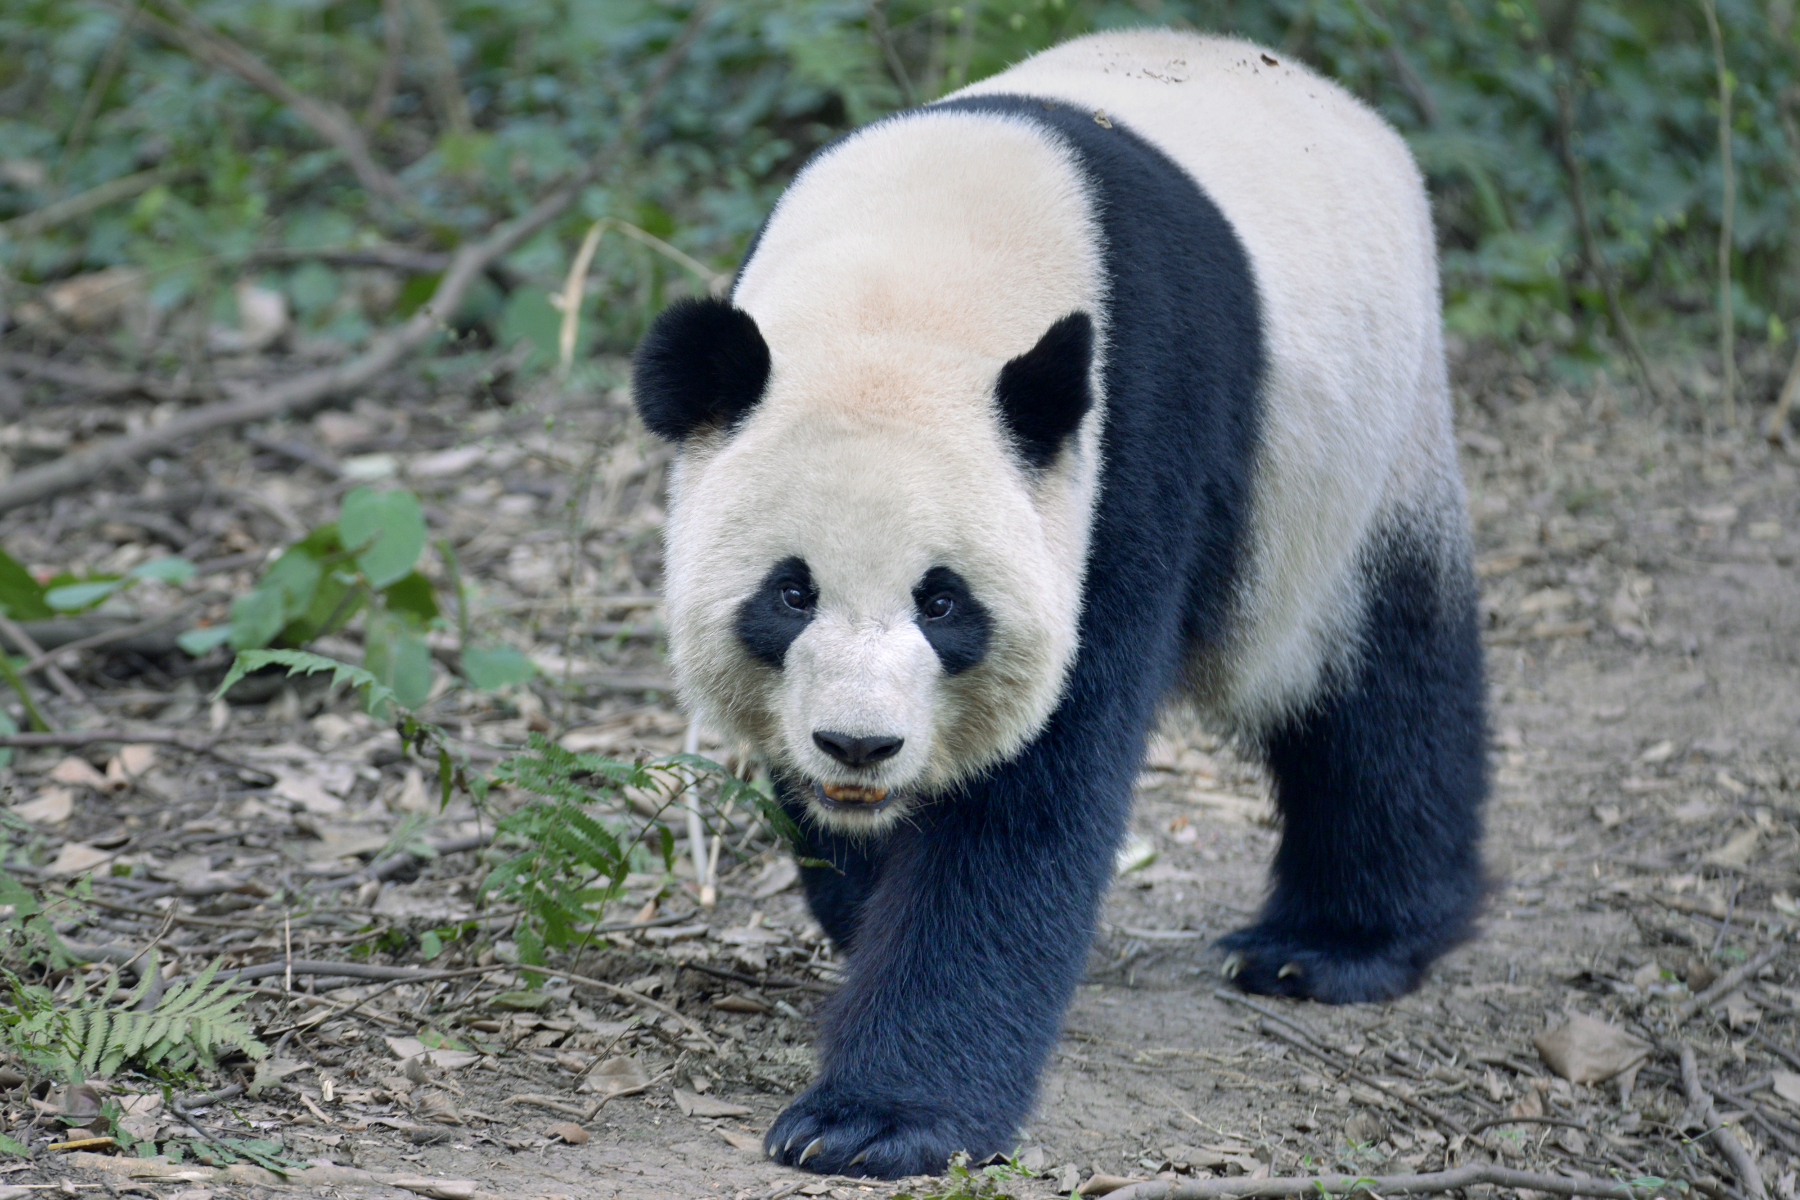 Front view of an adult panda walking on the ground